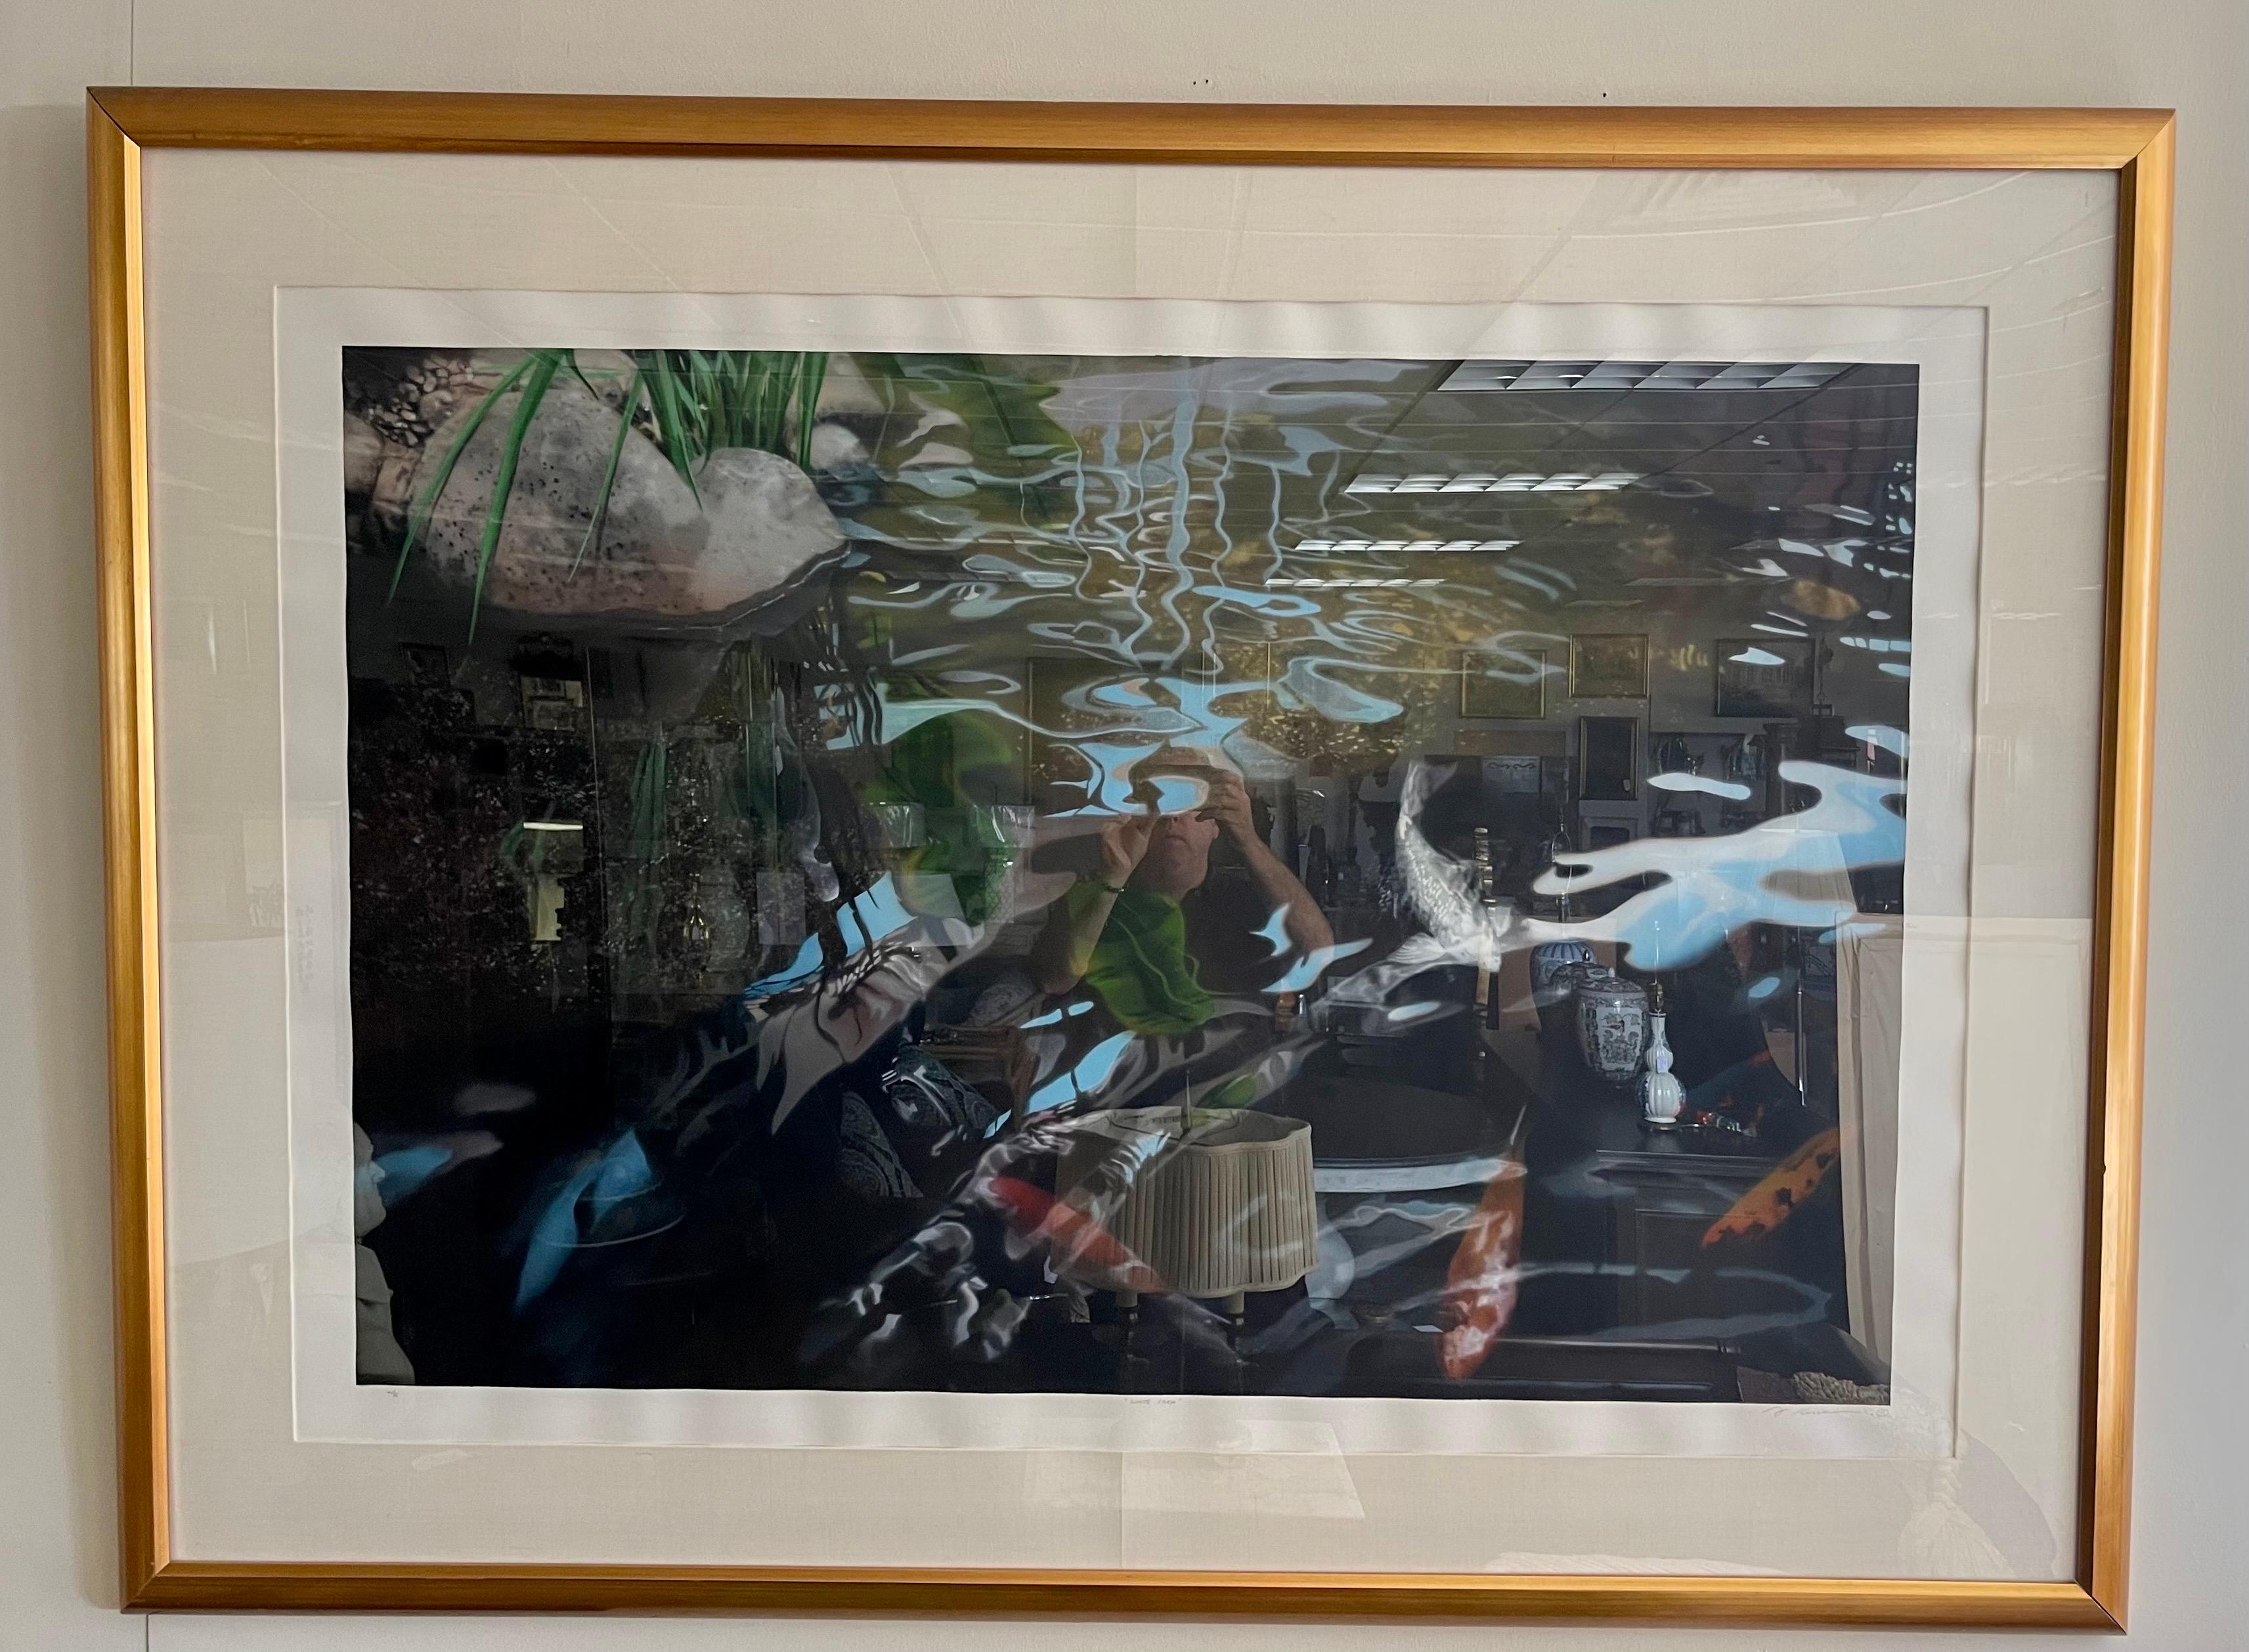 Exceptional, original large scale David Kessler (1950-) watercolor painting. It is signed by the artist at bottom right. It comes from a collection from Aetna Insurance Companies in Hartford, CT and is one of two we will be marketing exclusively on